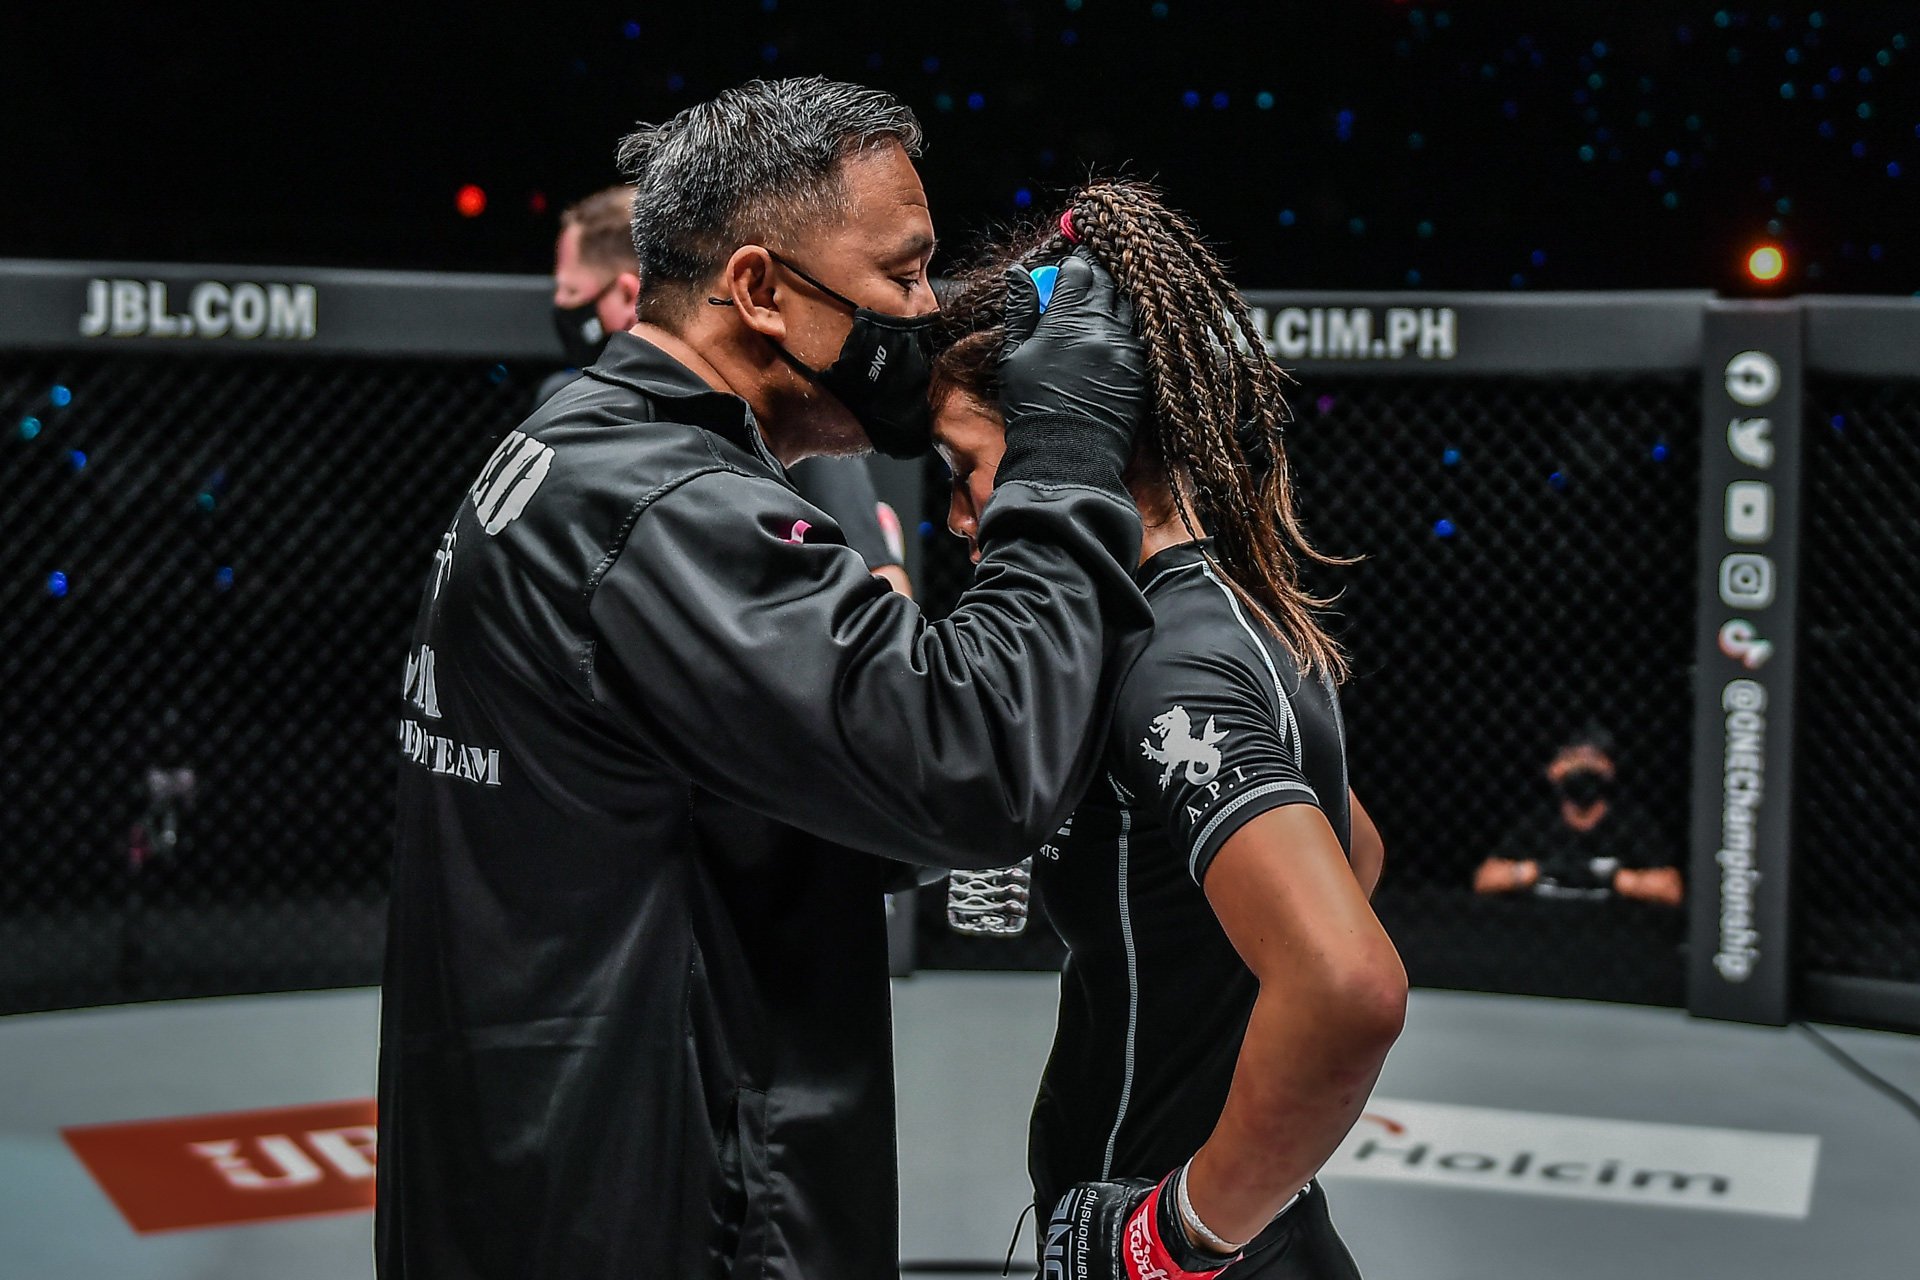 Victoria Lee’s father and coach Ken Lee congratulates her after her win over Victoria Souza. Photo: ONE Chasmpionship